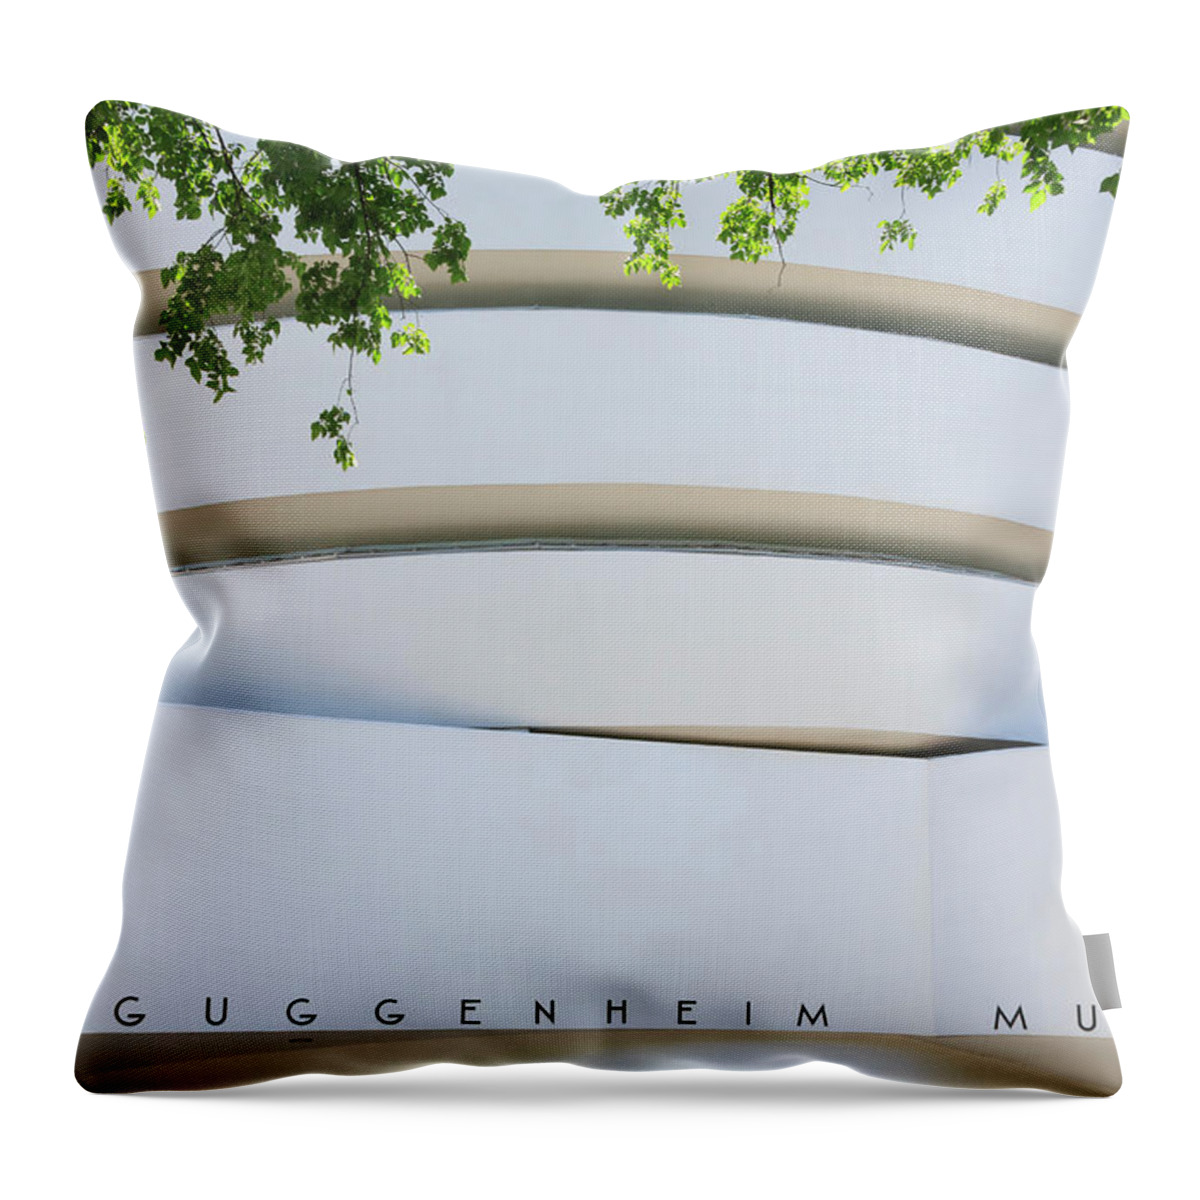 Estock Throw Pillow featuring the digital art Exterior Of Guggenheim Museum, Nyc by Maurizio Rellini